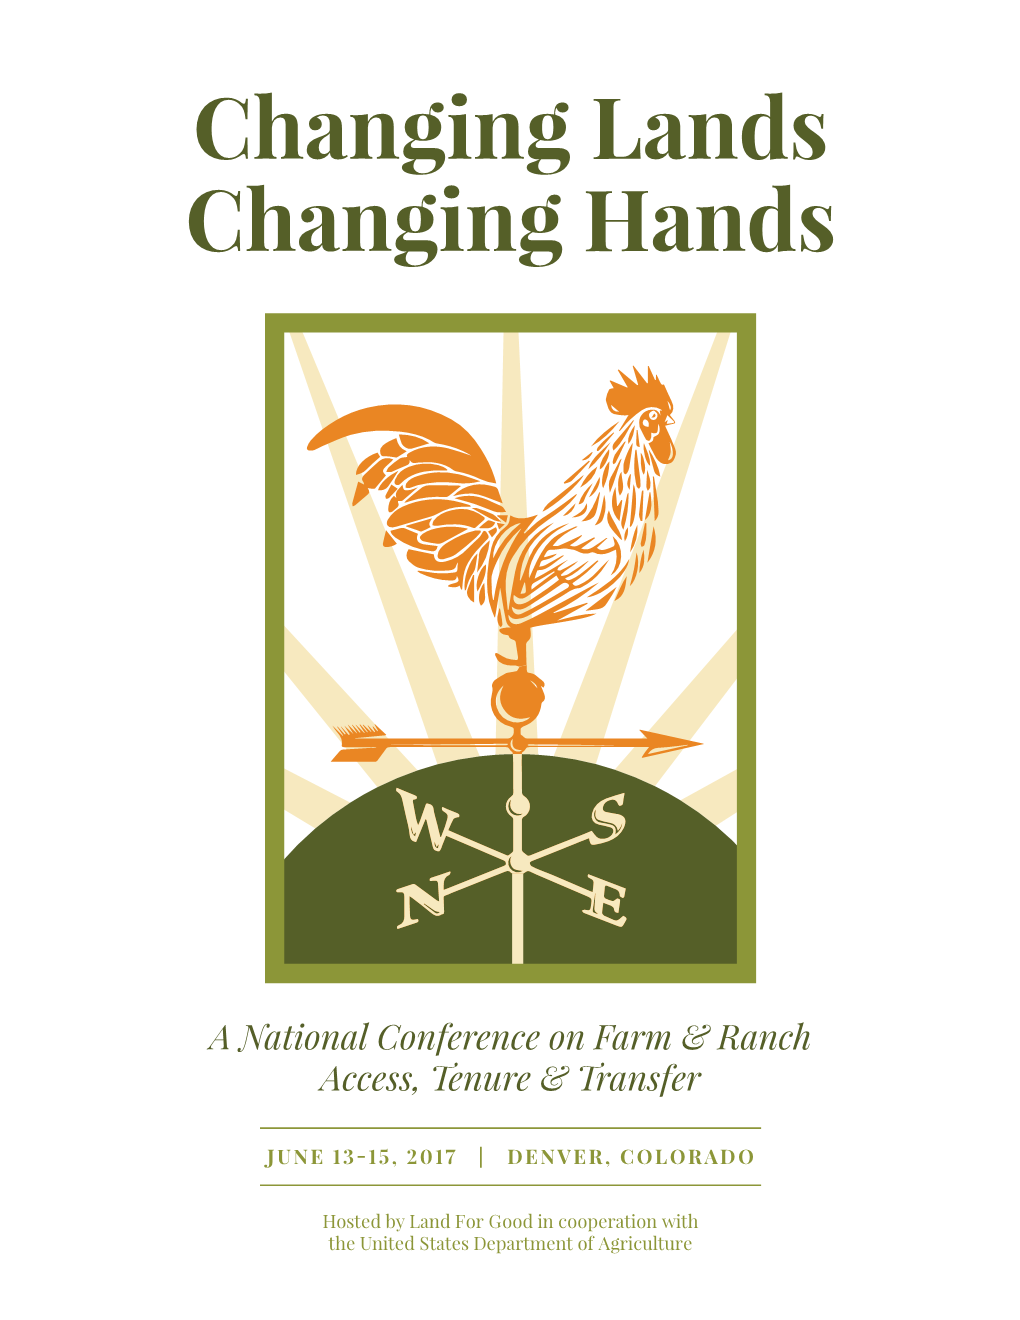 Changing Lands Changing Hands